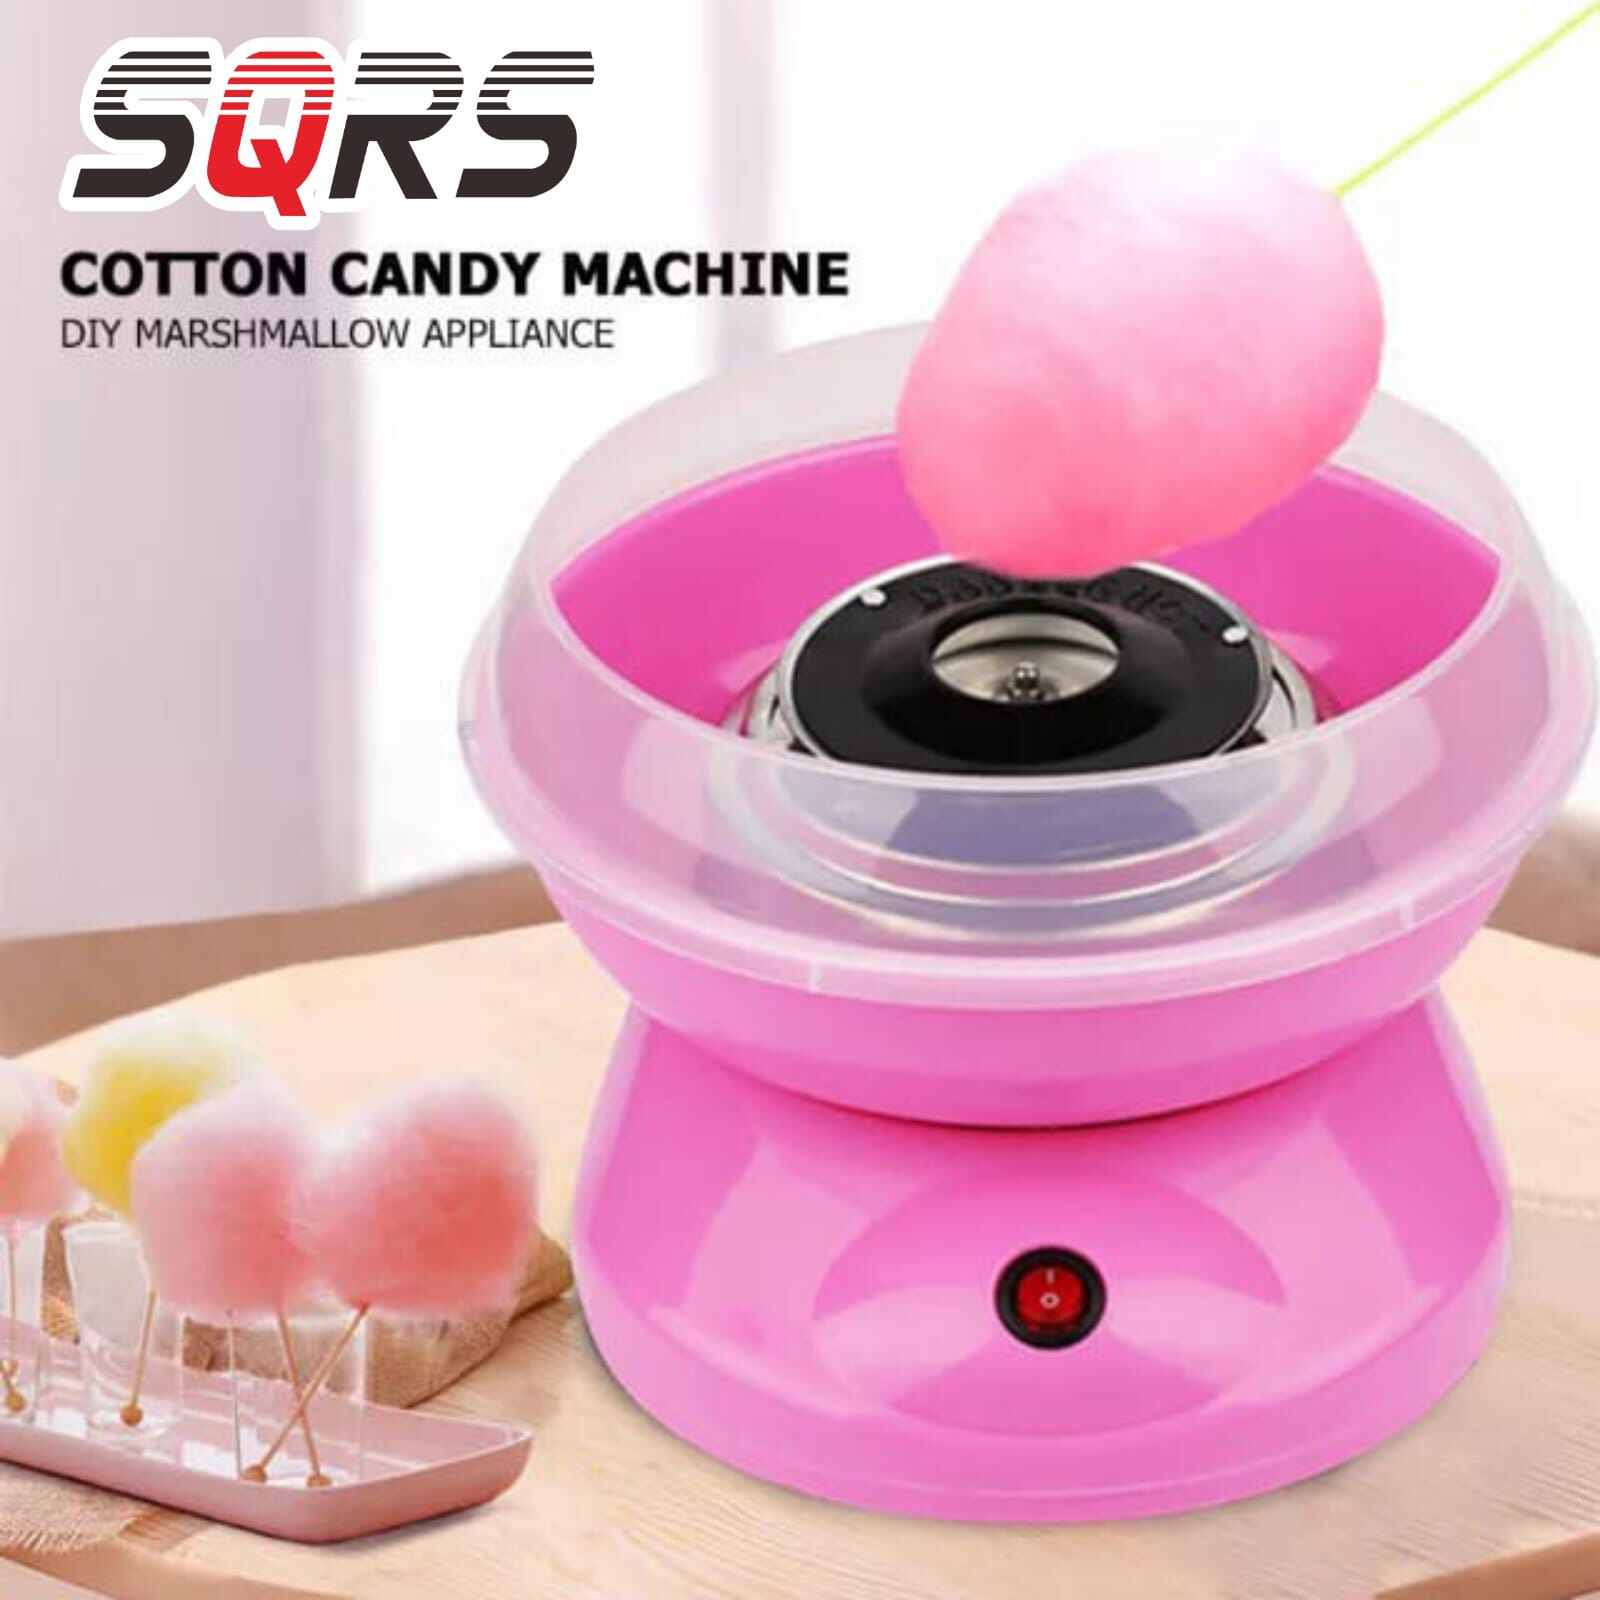 White home electric DIY children candy maker portable cotton sugar floss machine for girls and boys birthday parties gift Cotton candy machine cotton candy machine 